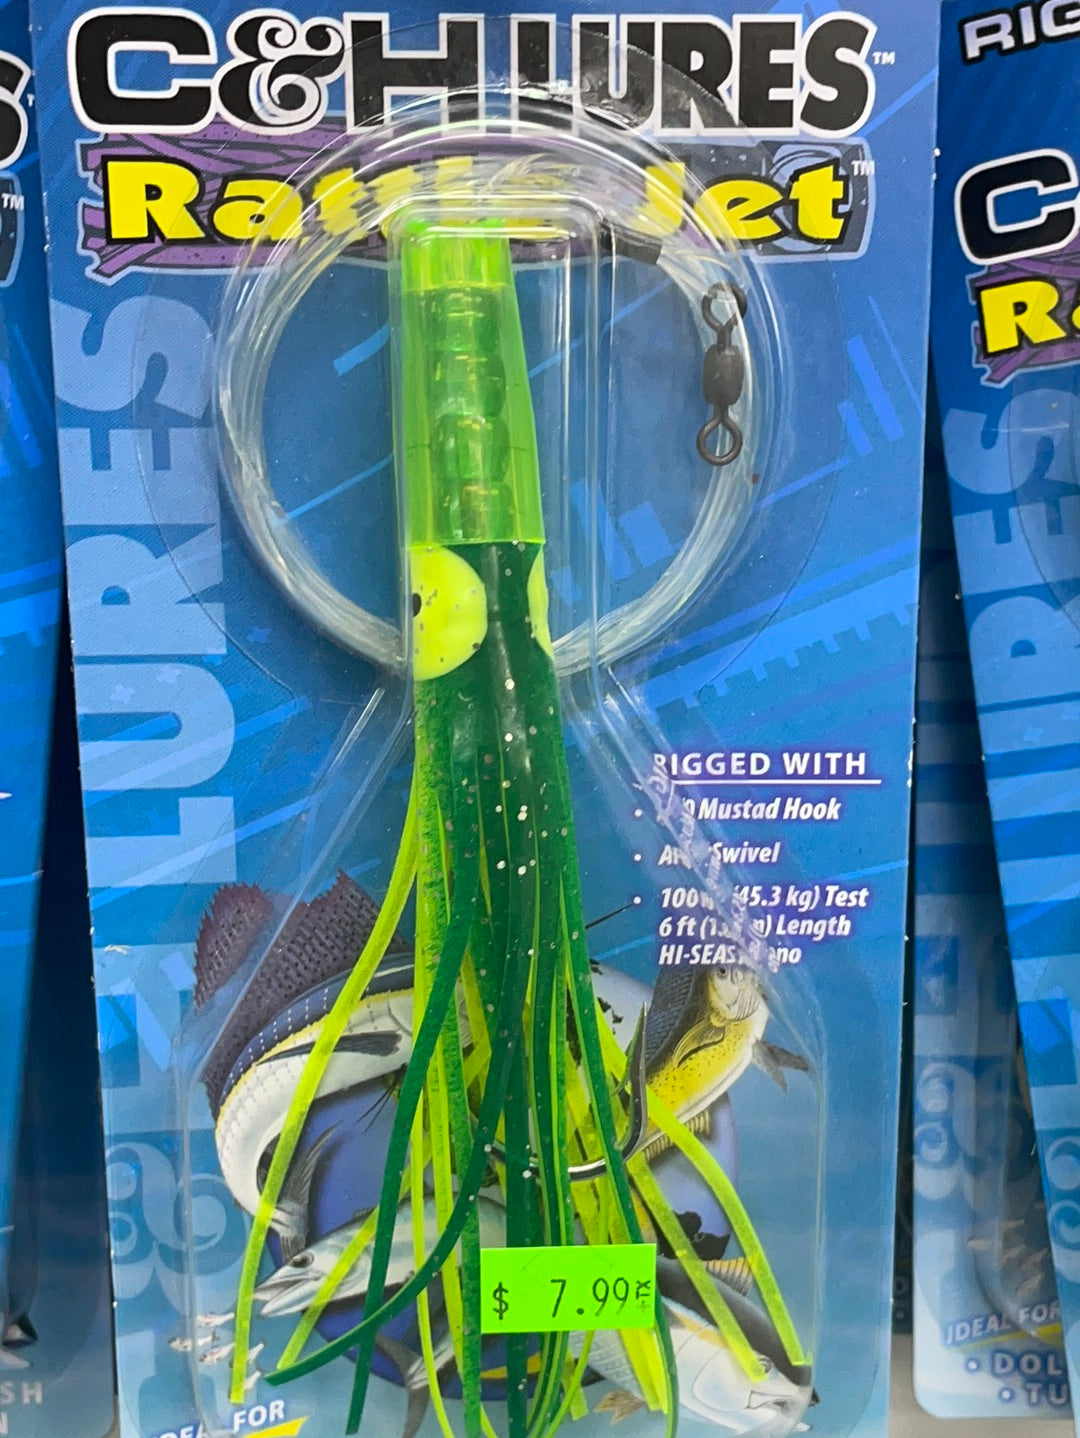 C&H Rattle Jet- Rigged Ready